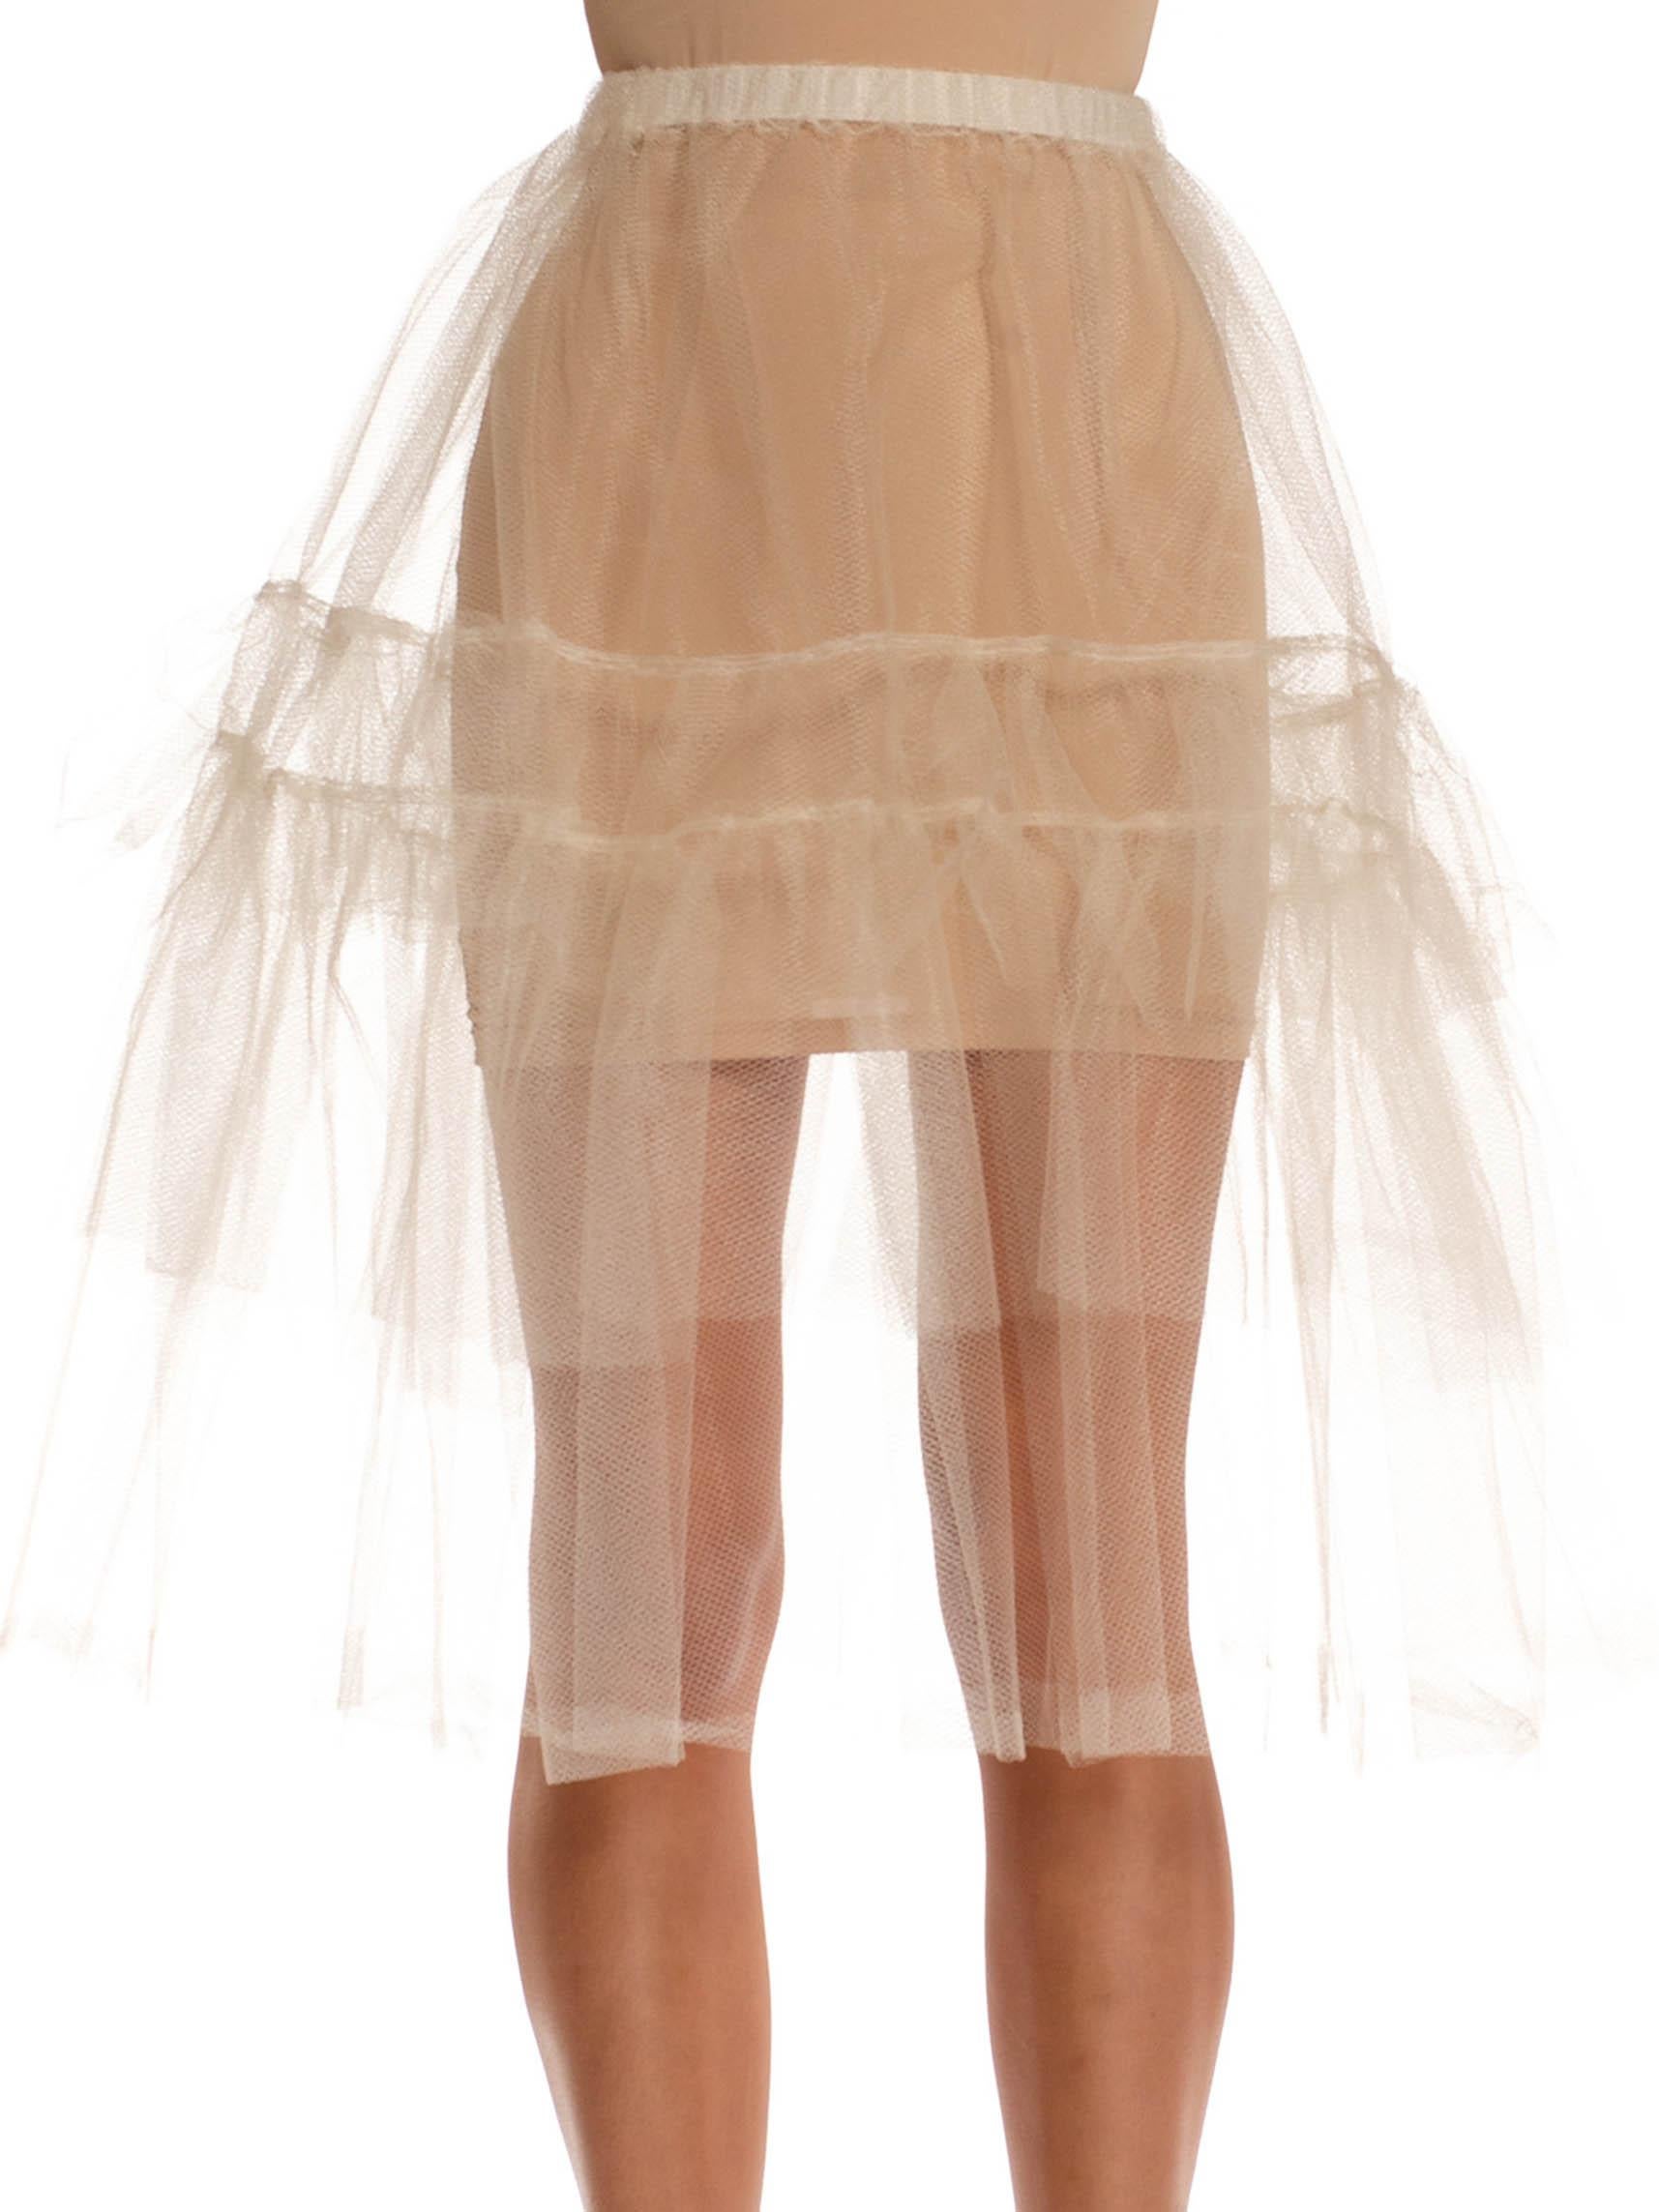 1980S White Tulle Tiered Tutu Skirt With Elastic Waistband For Sale 2